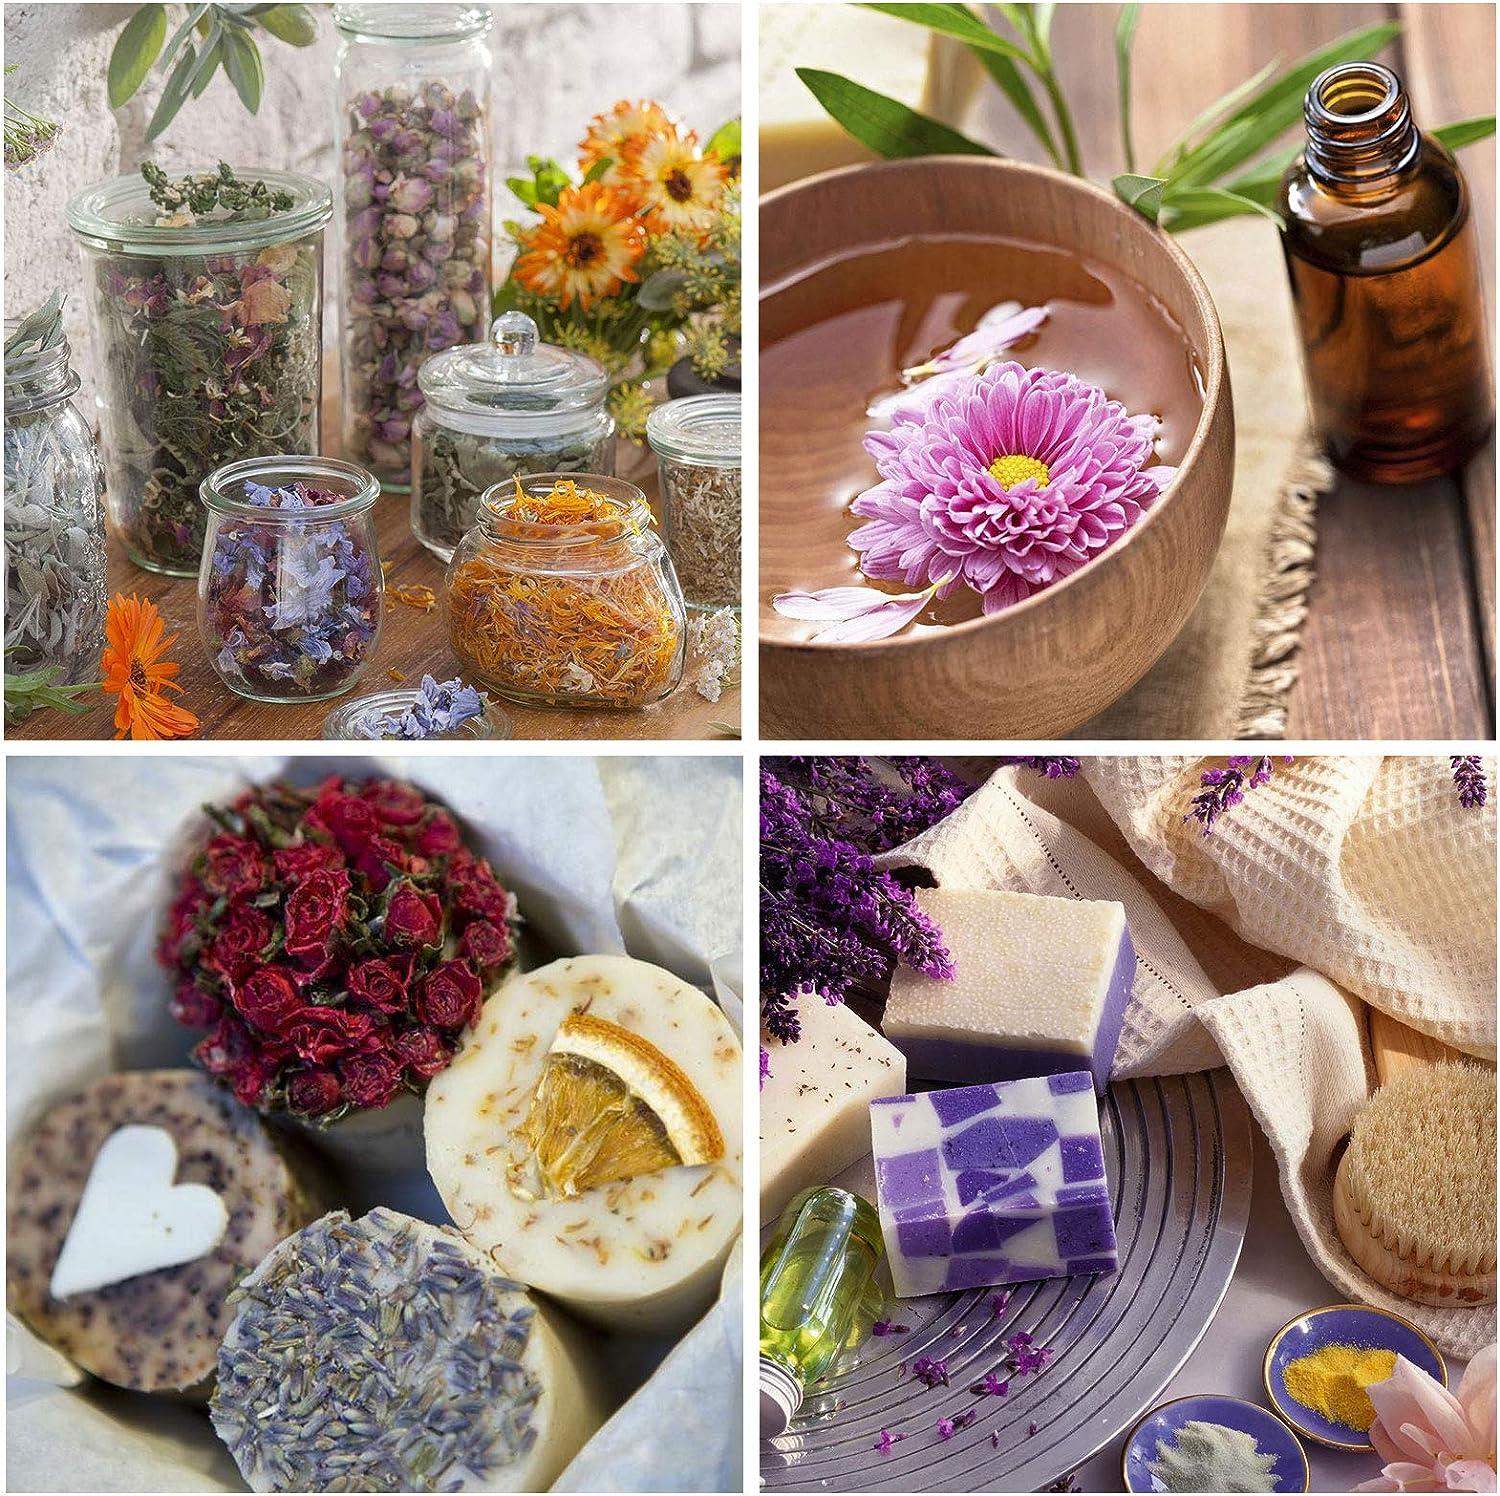 TAEERY Dried Flowers for Soap Making Scents Kits,DIY Soap/Candle Making  Supplies Set- Include Dried Lavender, Rose Petals, Lily Flower,Colorful  Chrysanthemum, Forget-me-not and More